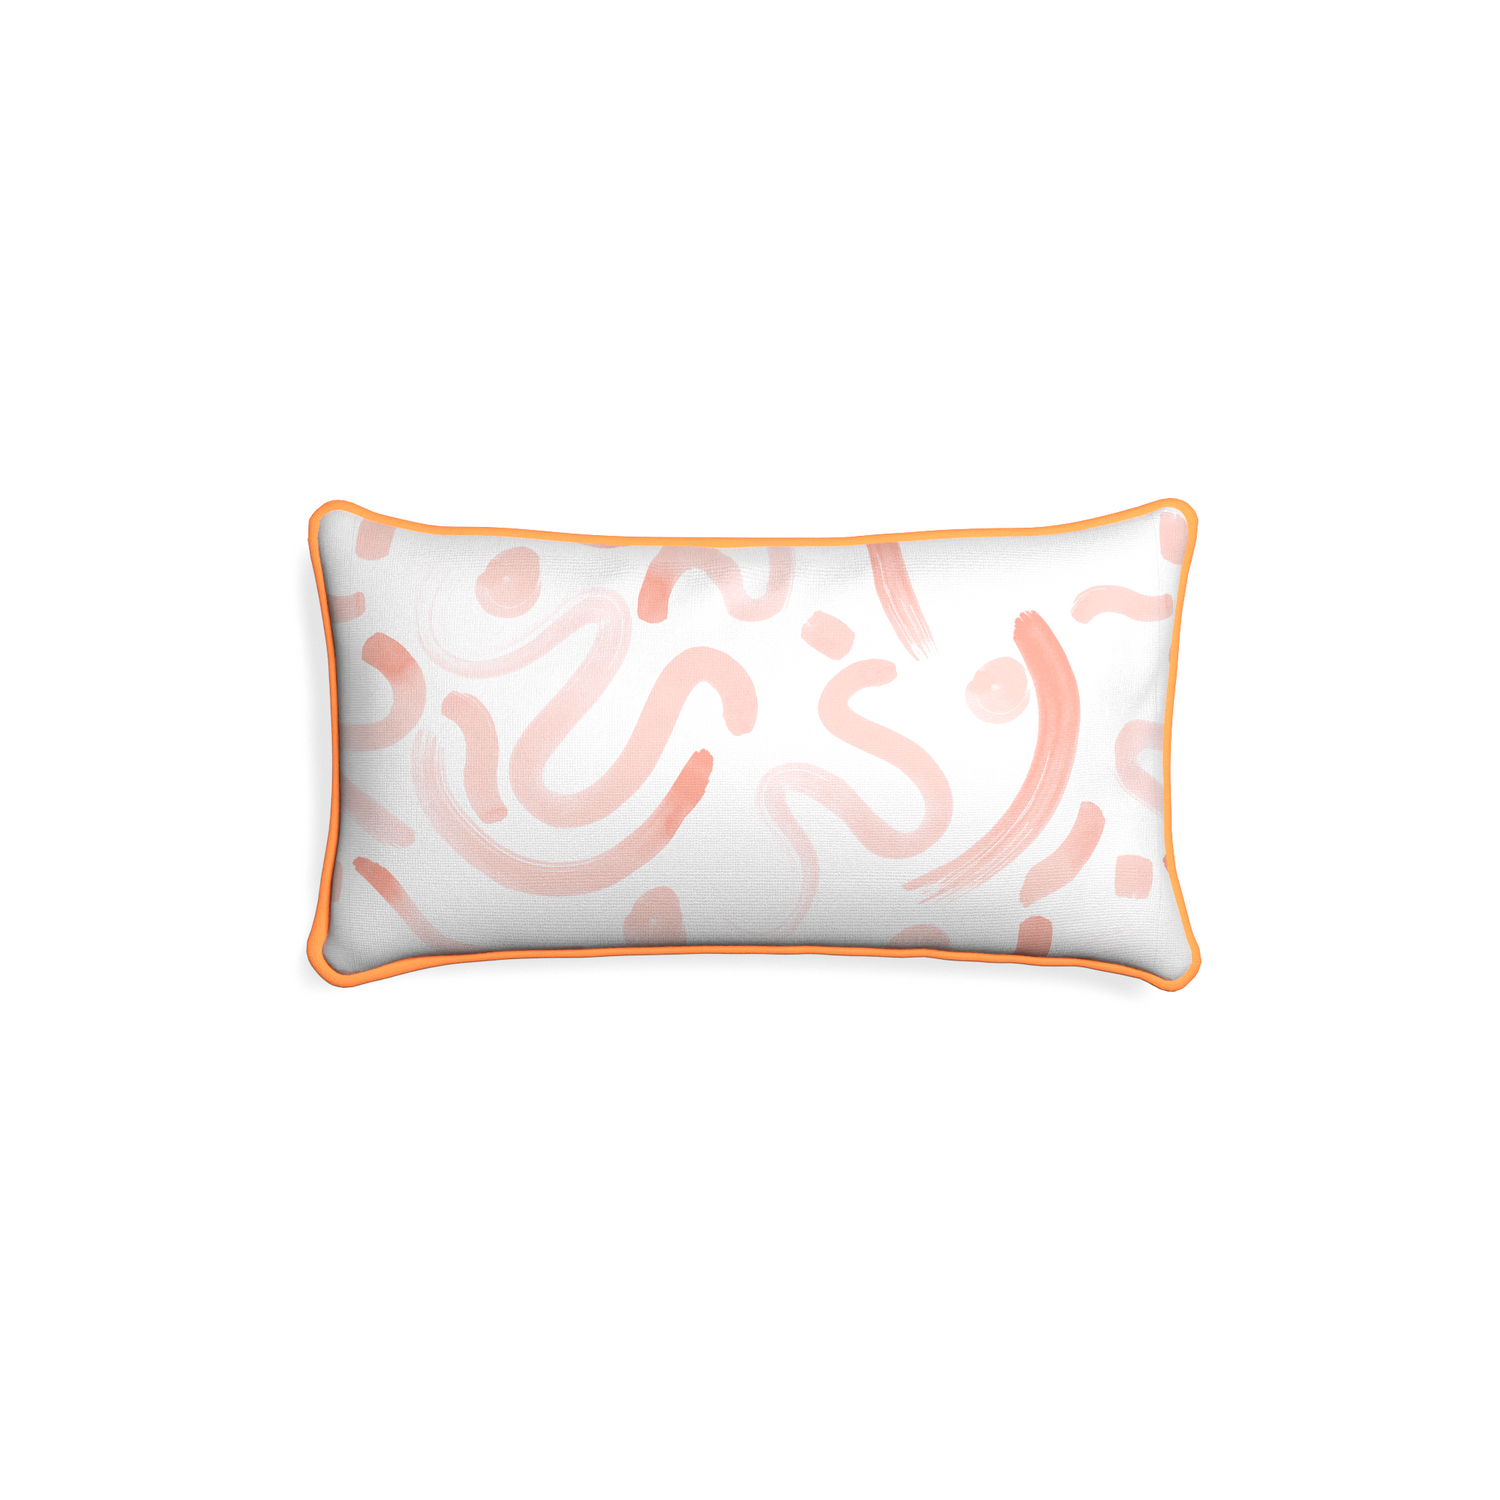 Petite-lumbar hockney pink custom pink graphicpillow with clementine piping on white background